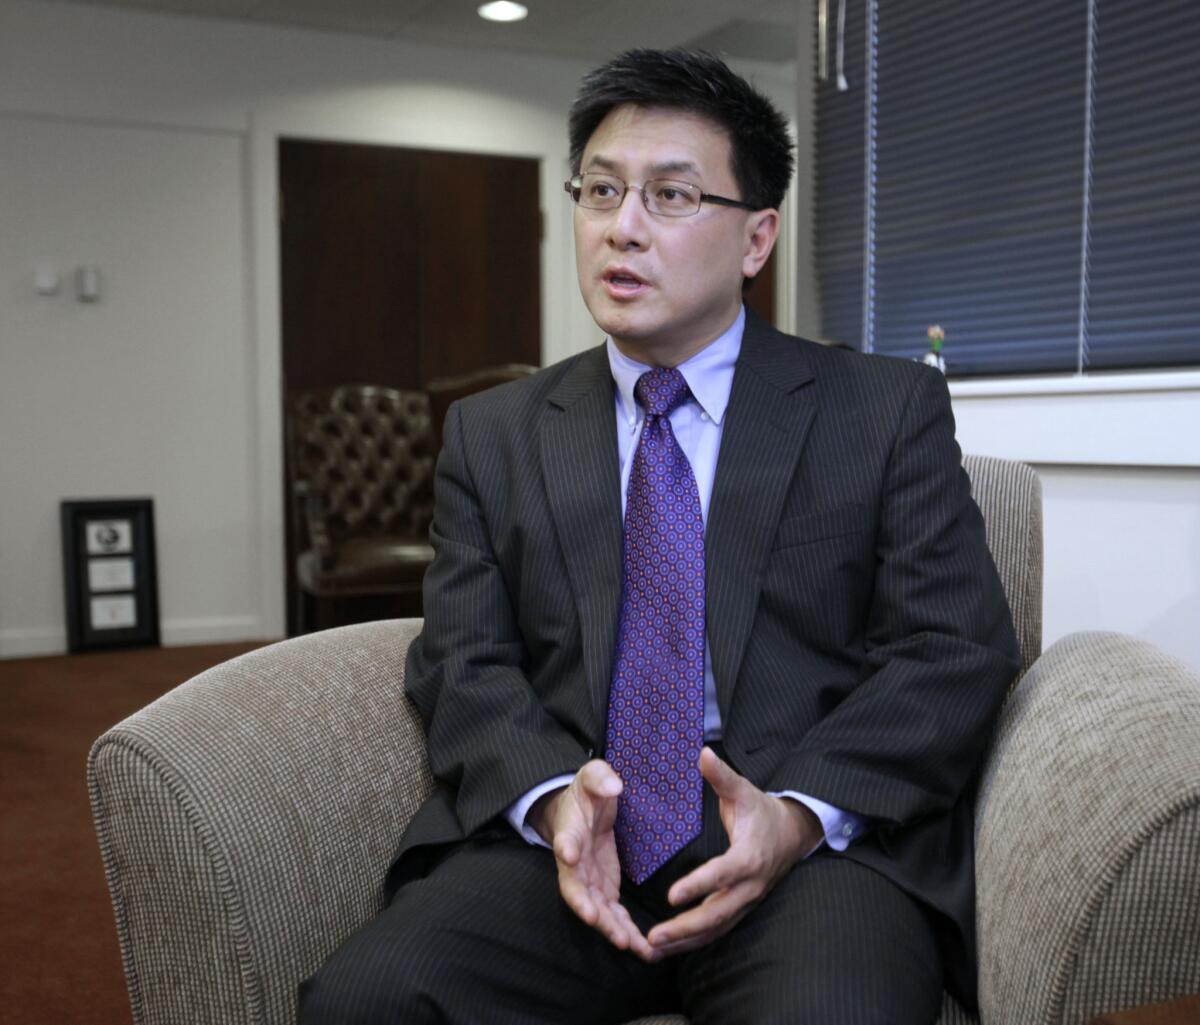 Controller John Chiang lost an appeals court decision Friday. The court said he did not have power to rule that the 2011 budget was not balanced.